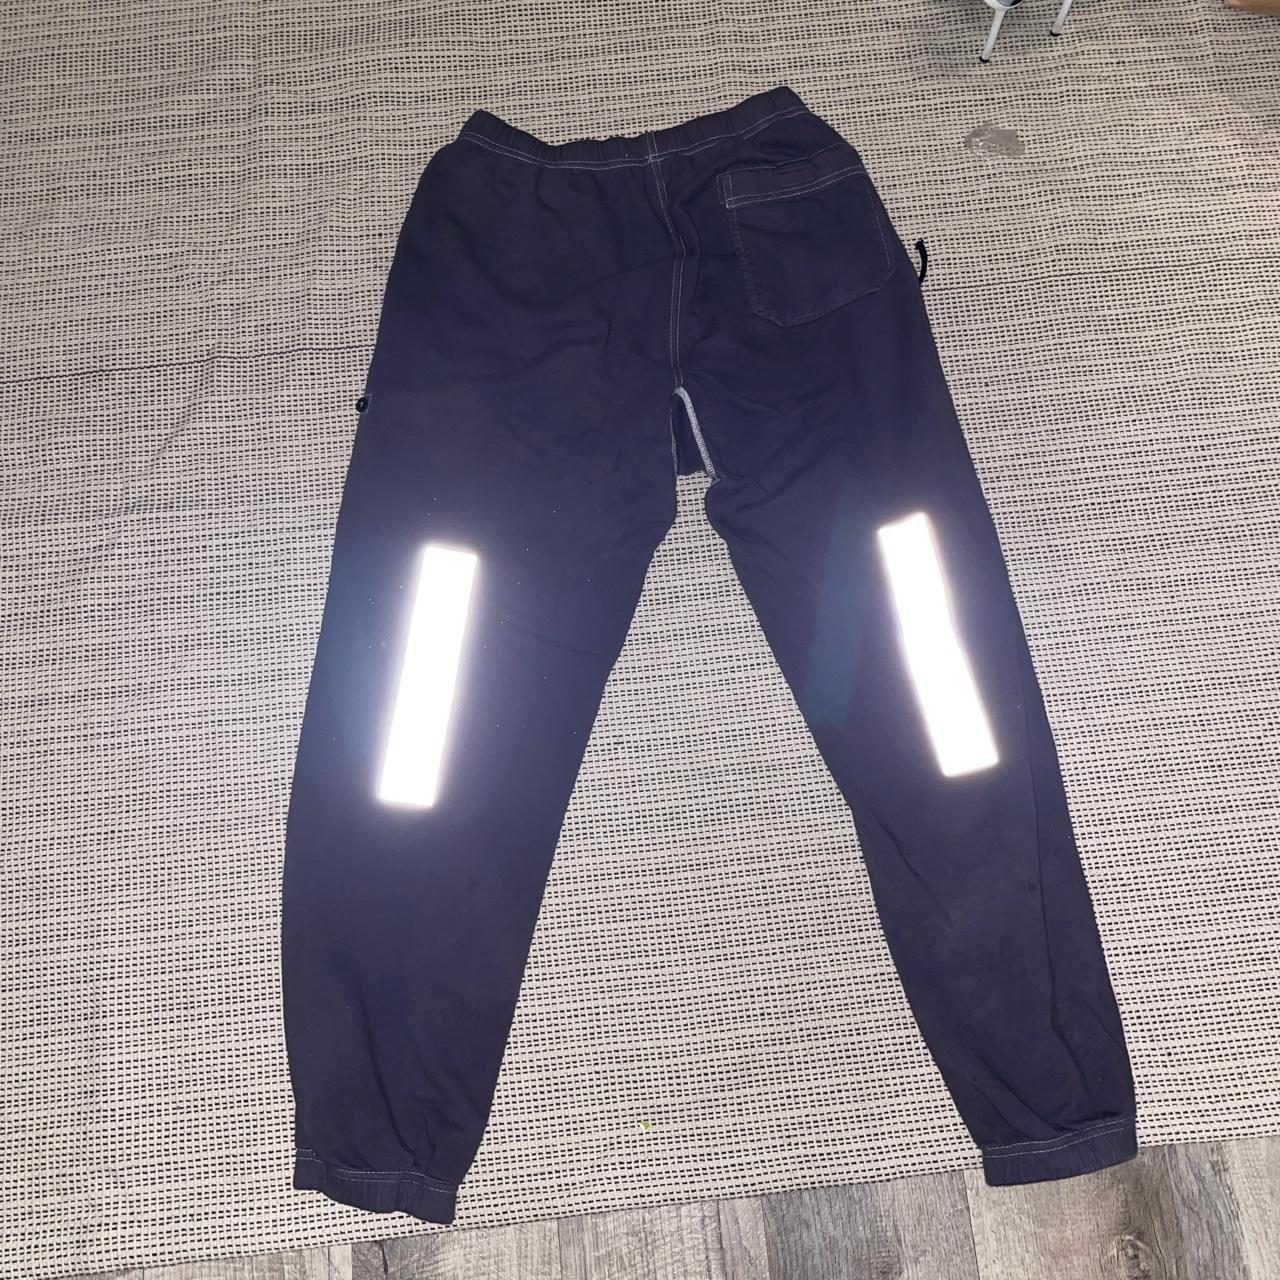 PLT stone slogan joggers Great condition just never - Depop